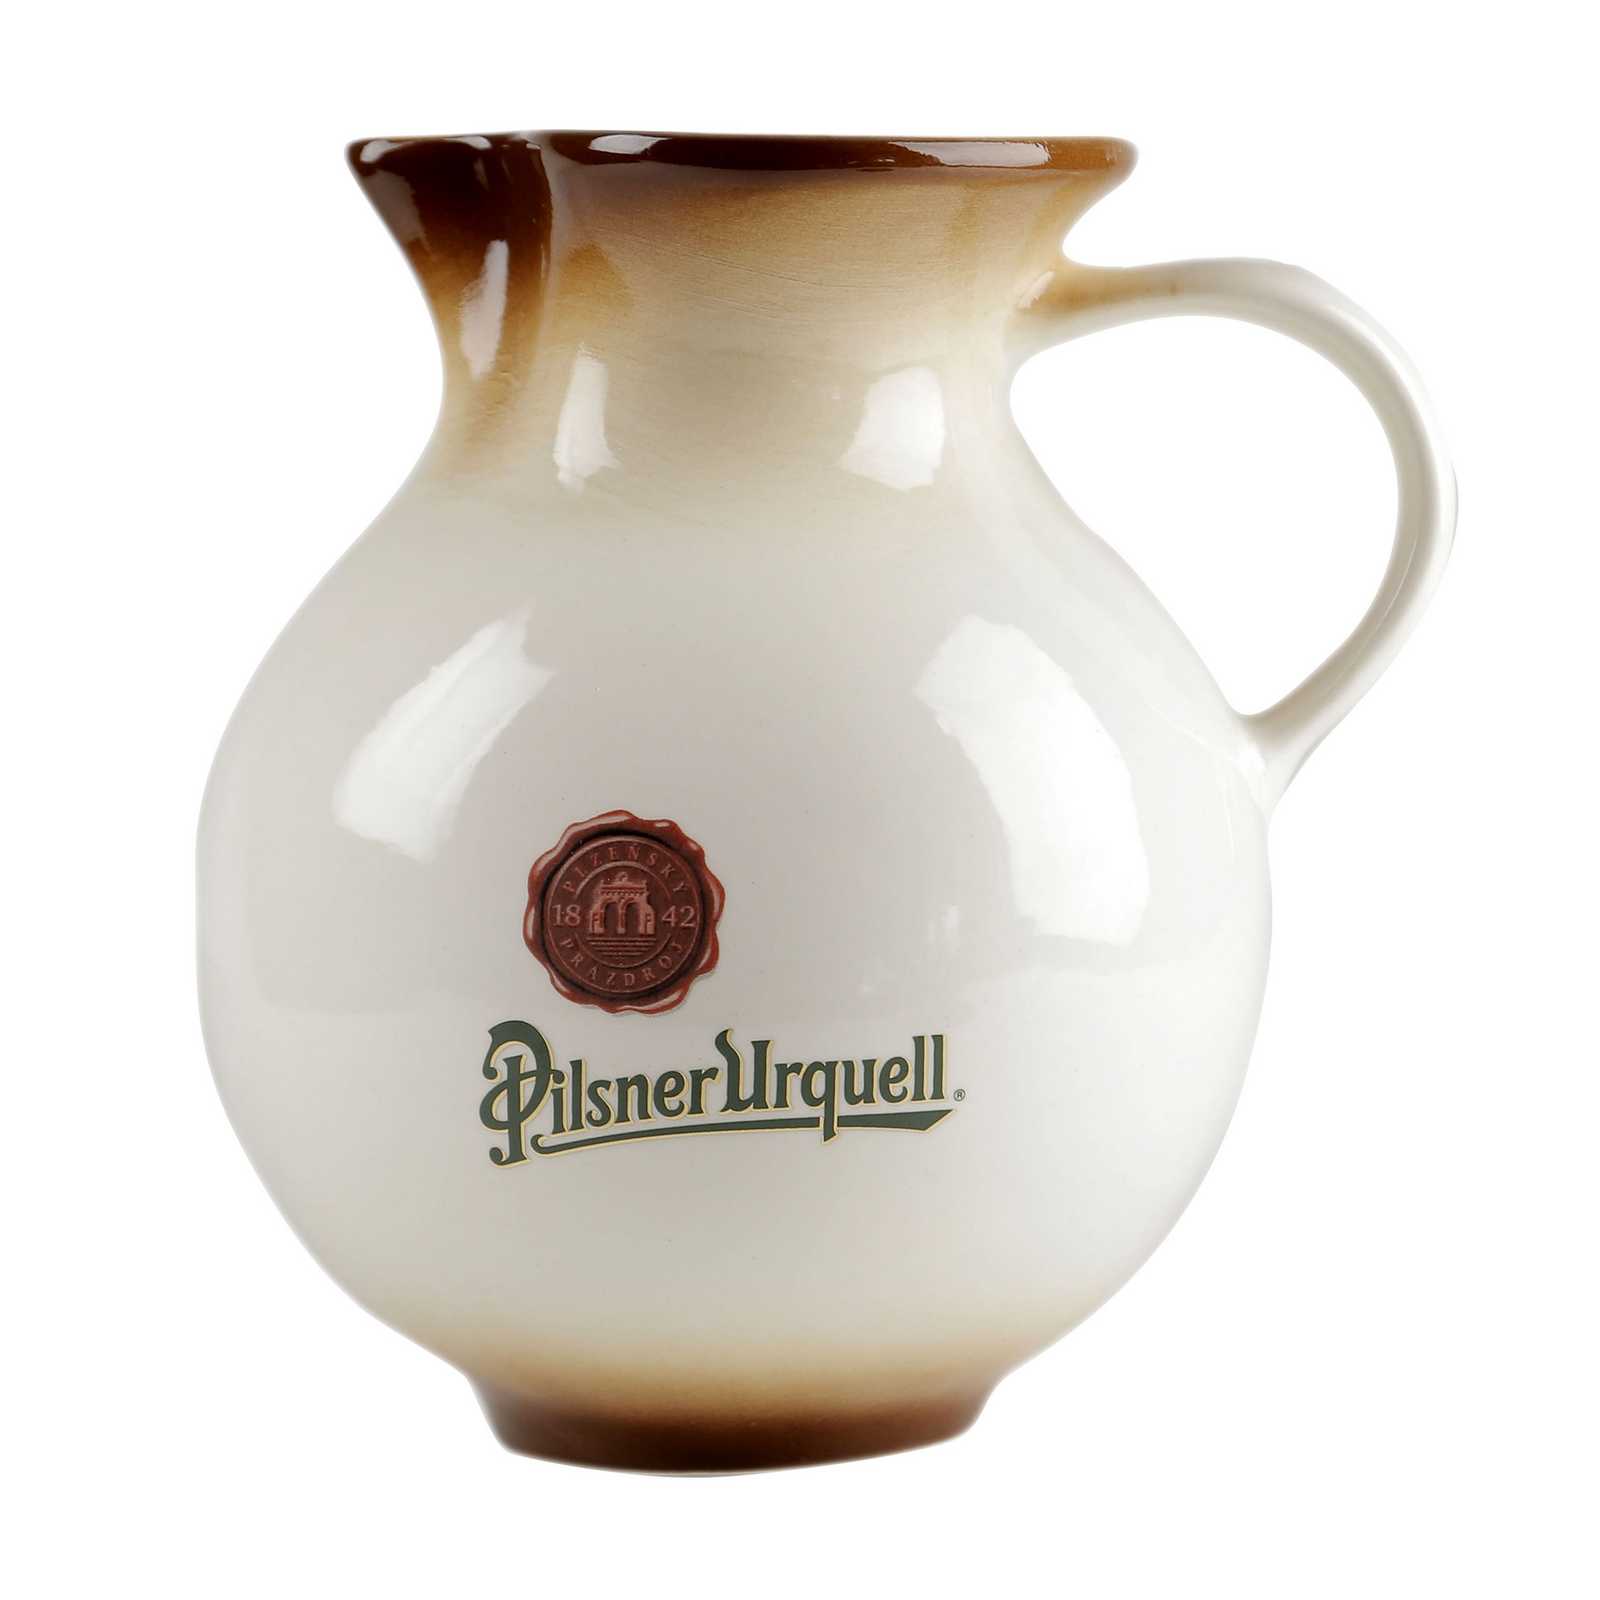 2.5 l beer pitcher with the Pilsner Urquell logo